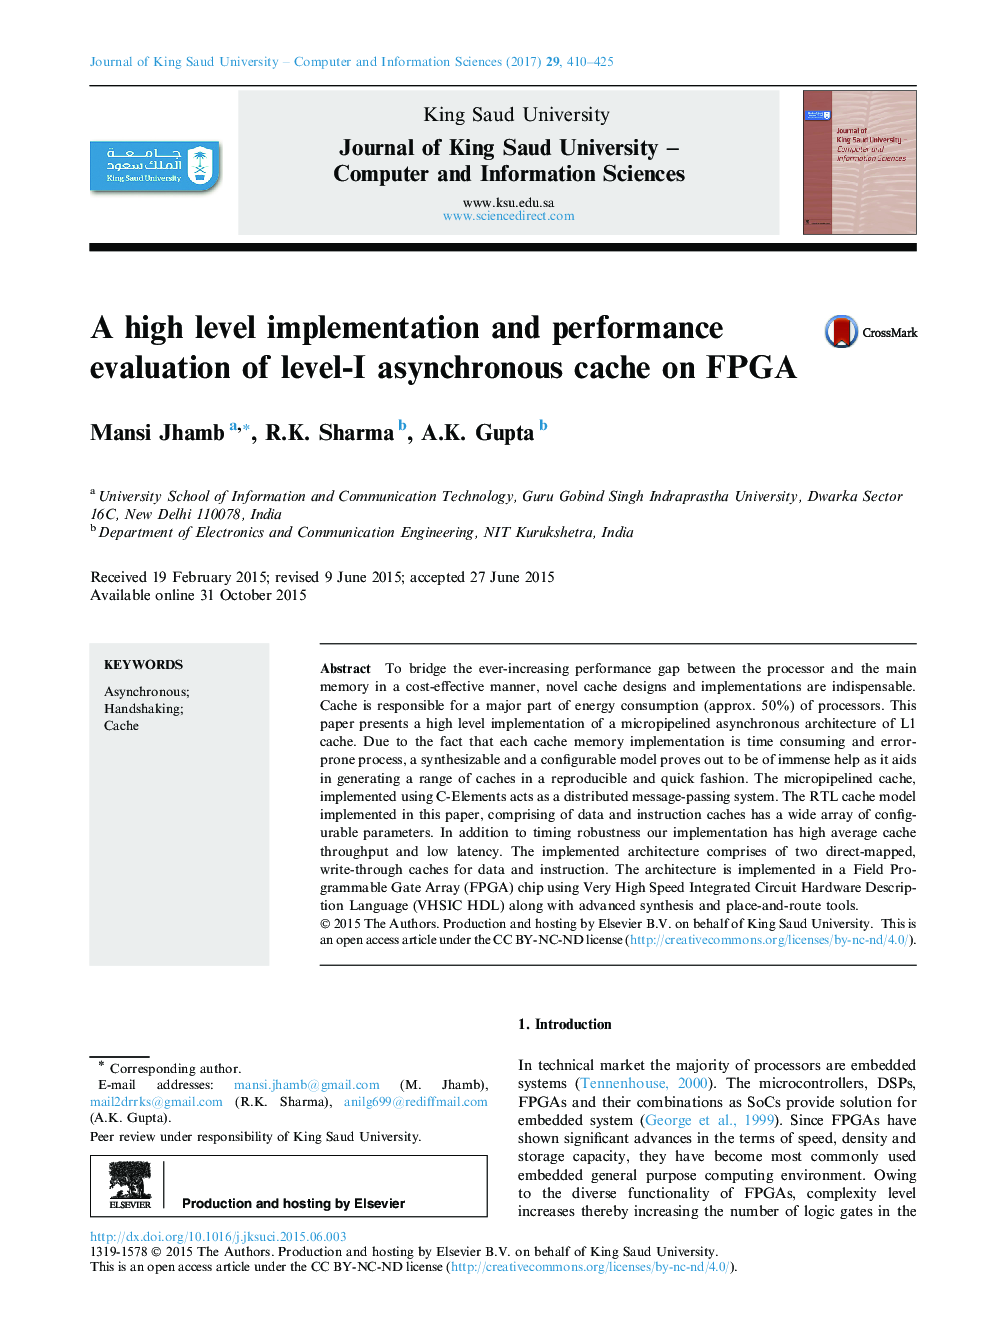 A high level implementation and performance evaluation of level-I asynchronous cache on FPGA